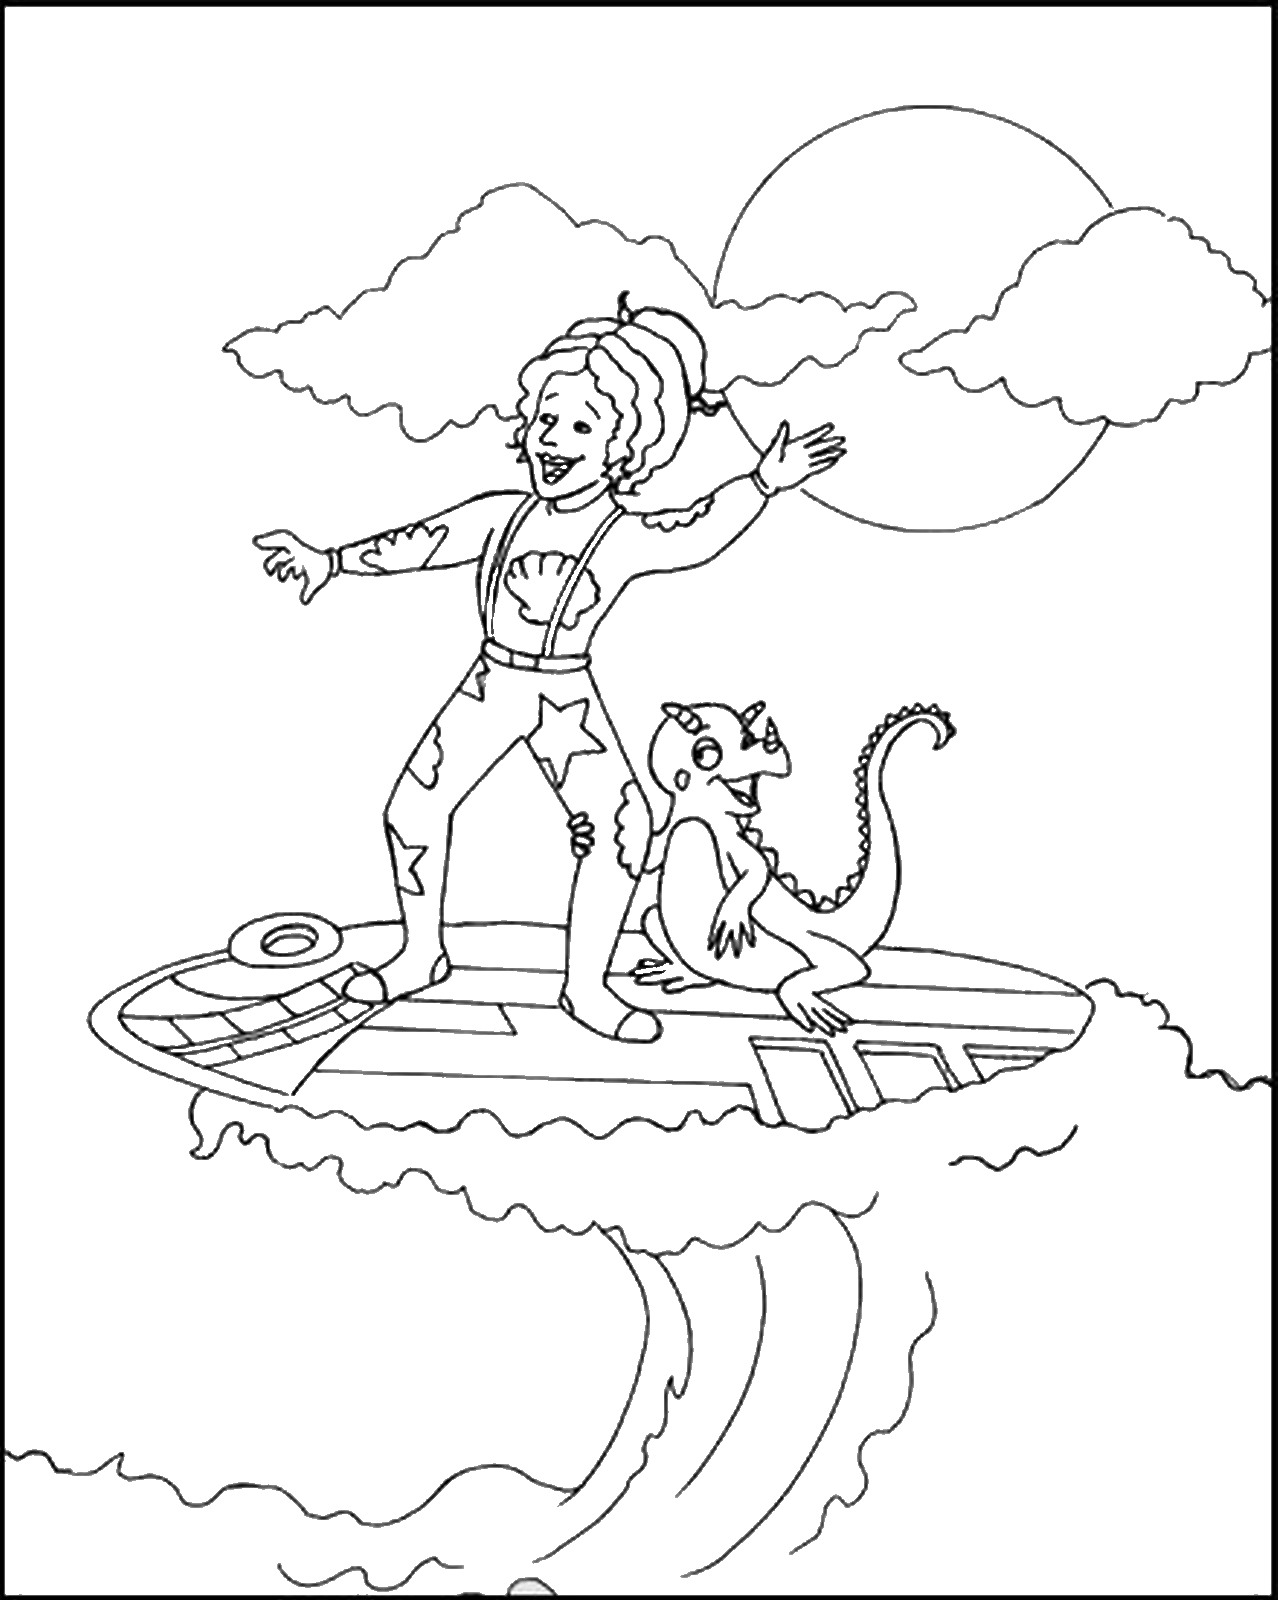 Ms Frizzle Surfboarding Coloring Page